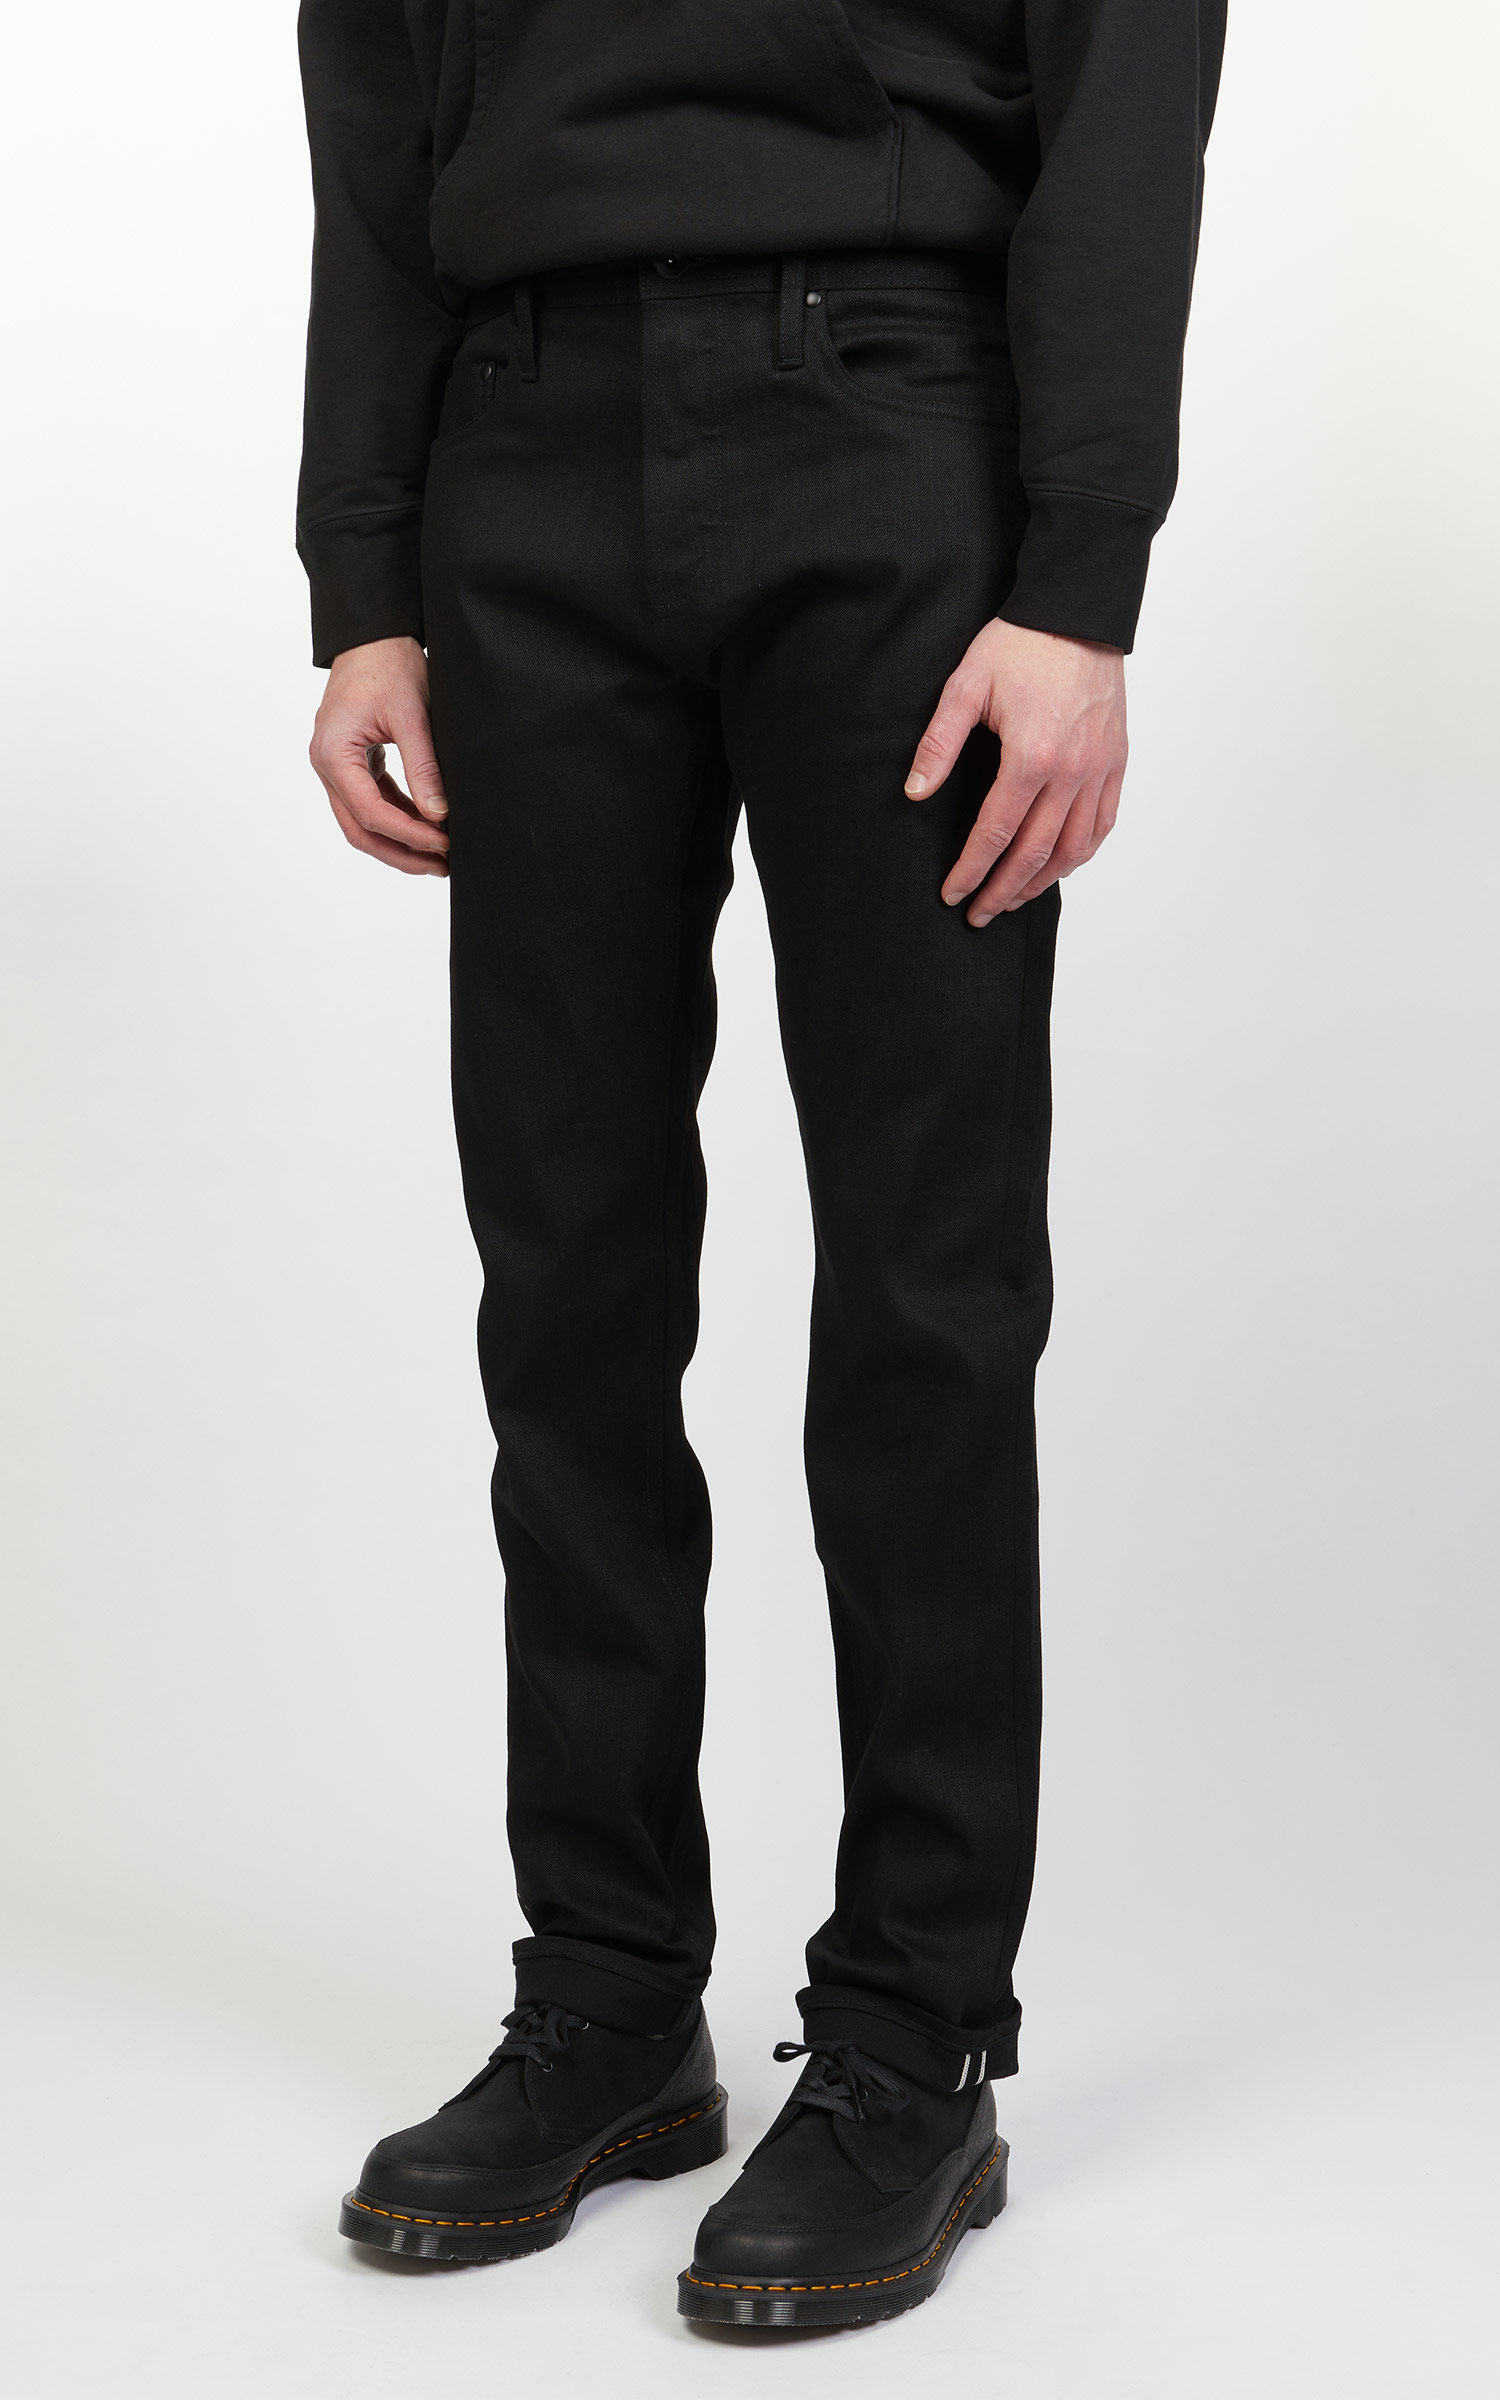 The Unbranded Brand UB244 Tapered Fit Stretch Selvedge Black 11oz Cultizm